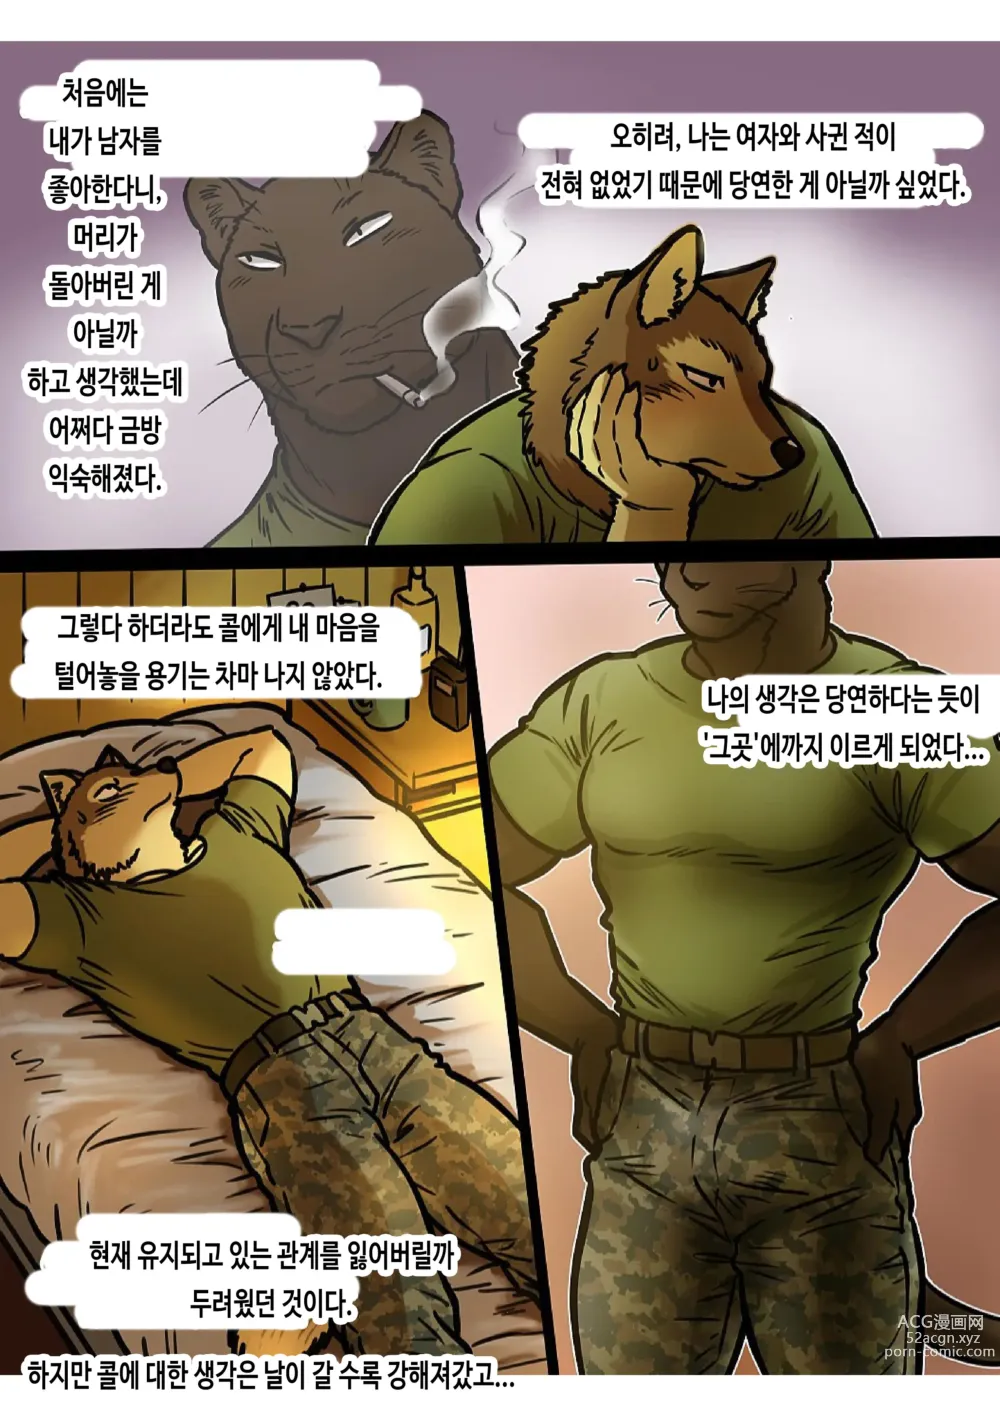 Page 9 of doujinshi 브라더스 인 암스 2017 Ver.